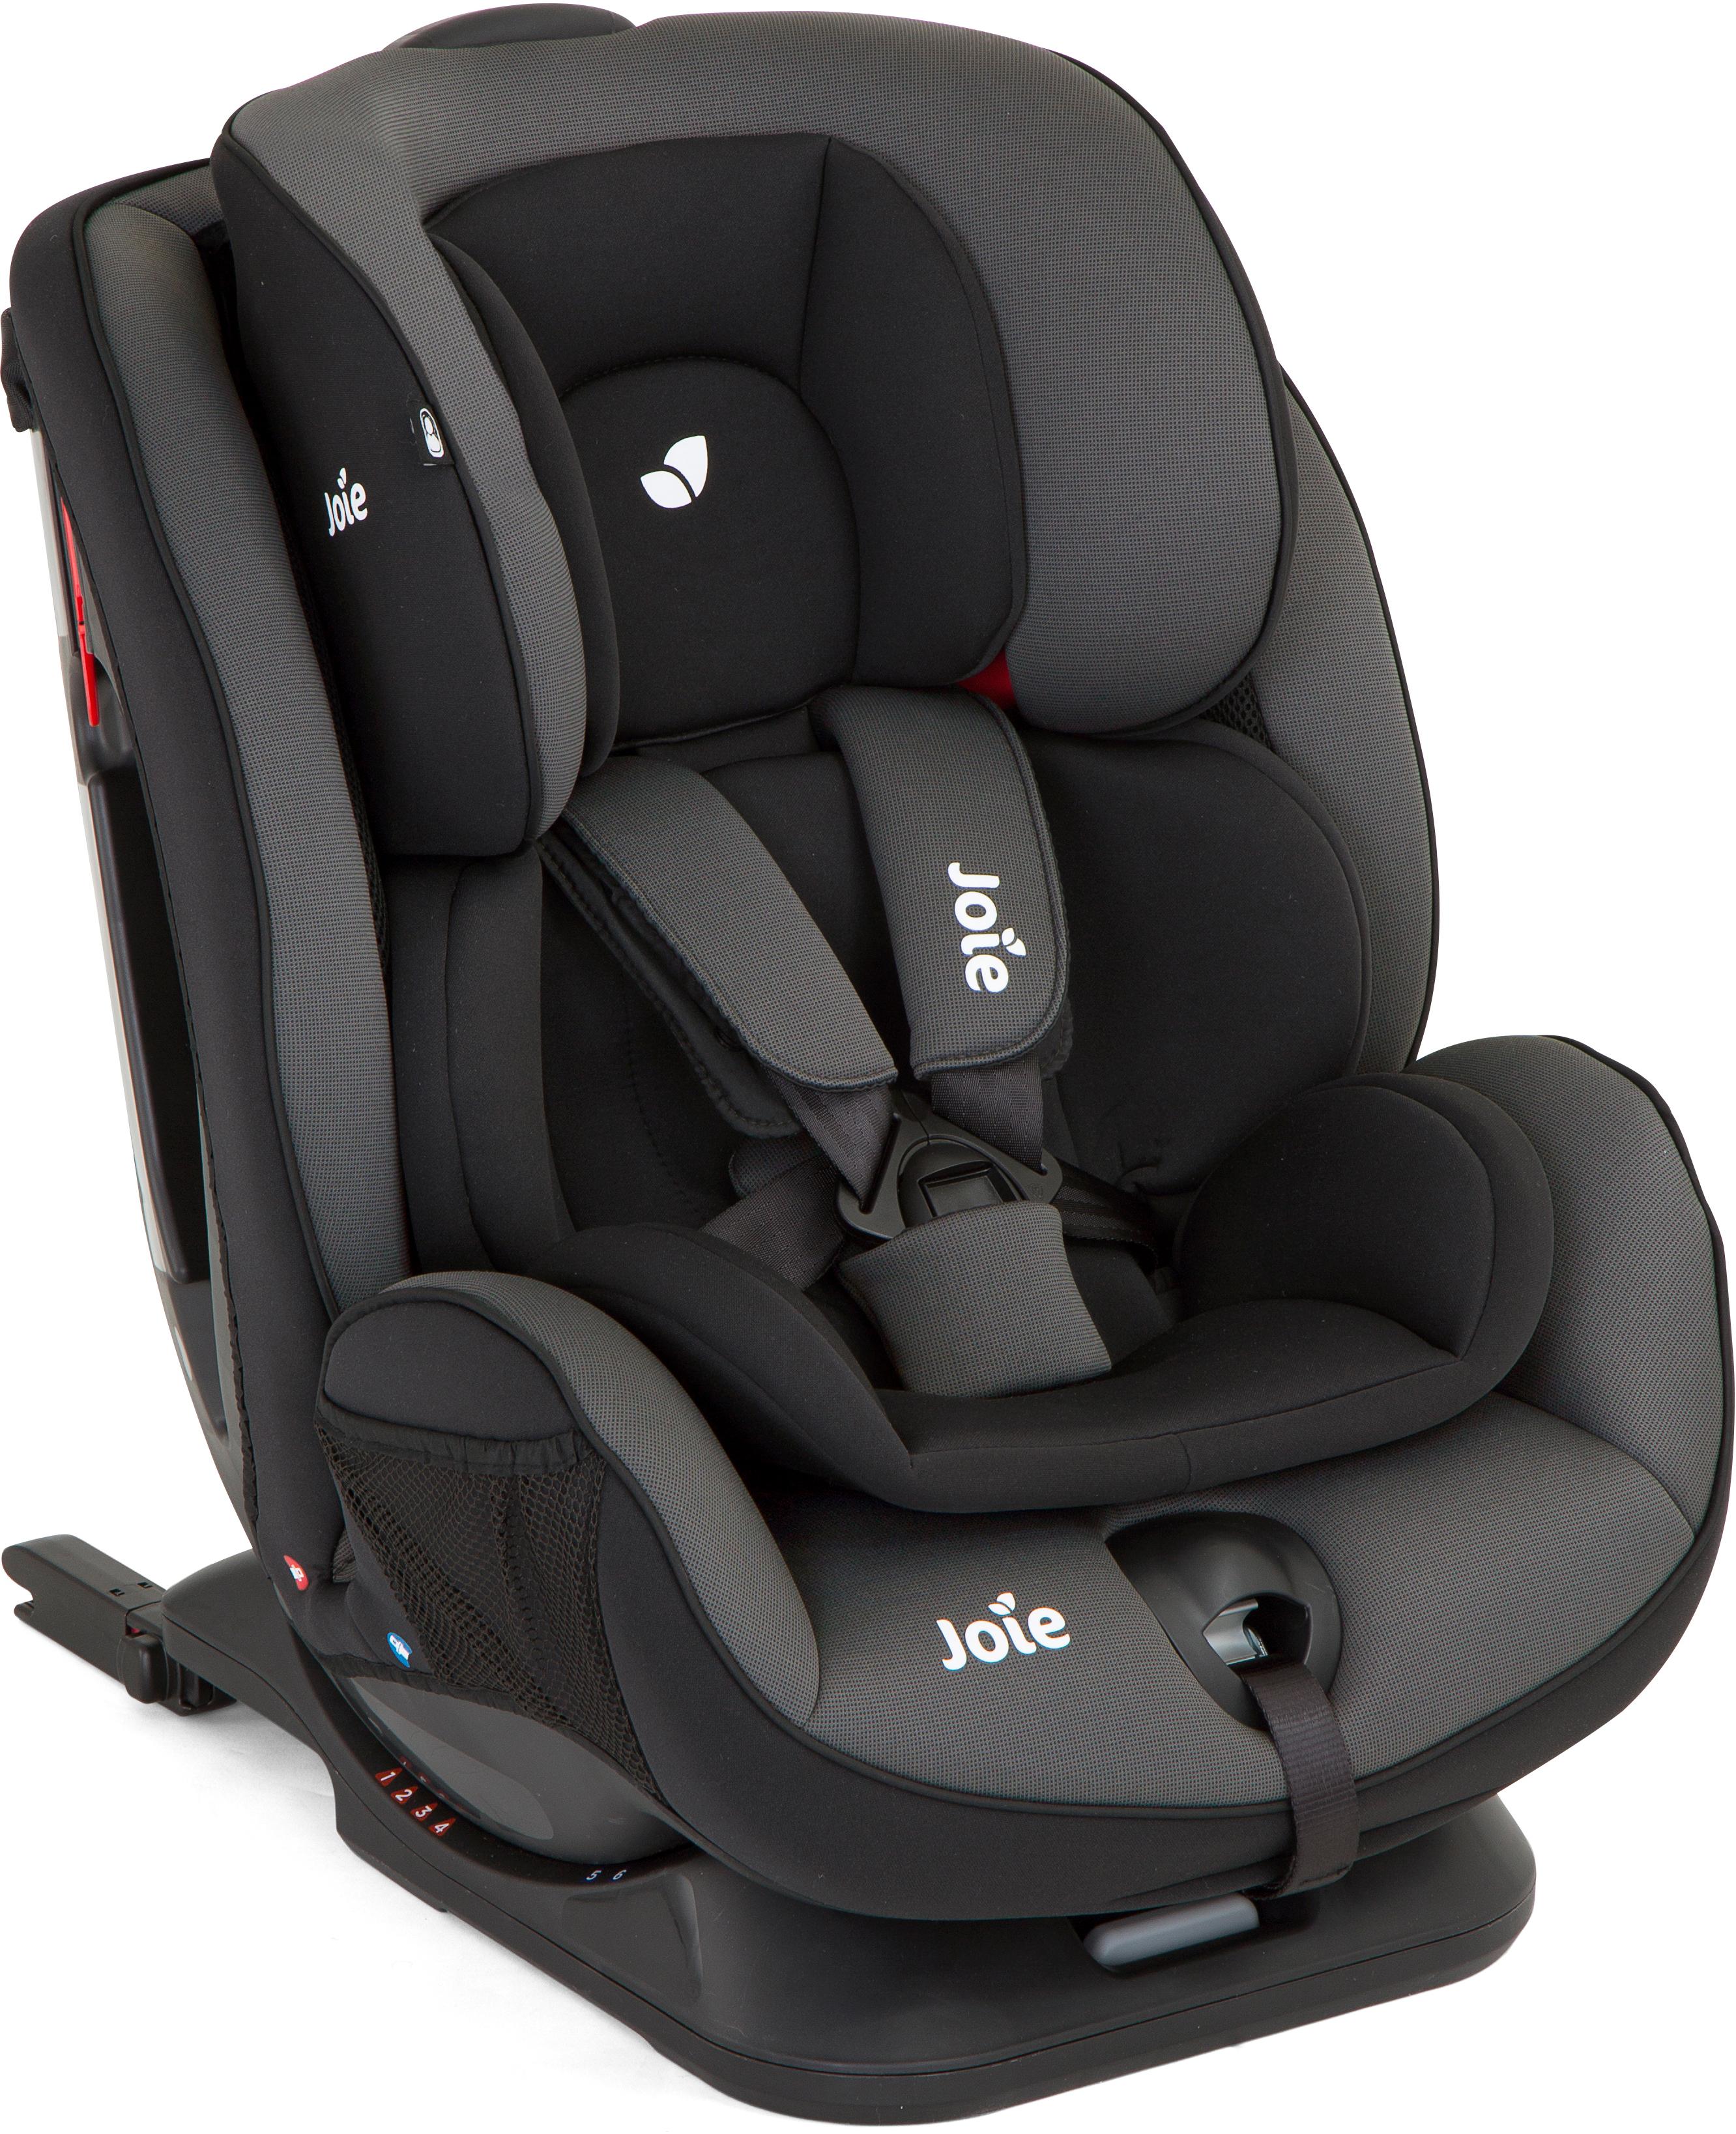 Joie Stages Fx Group 0+/1/2 Child Car Seat - Ember